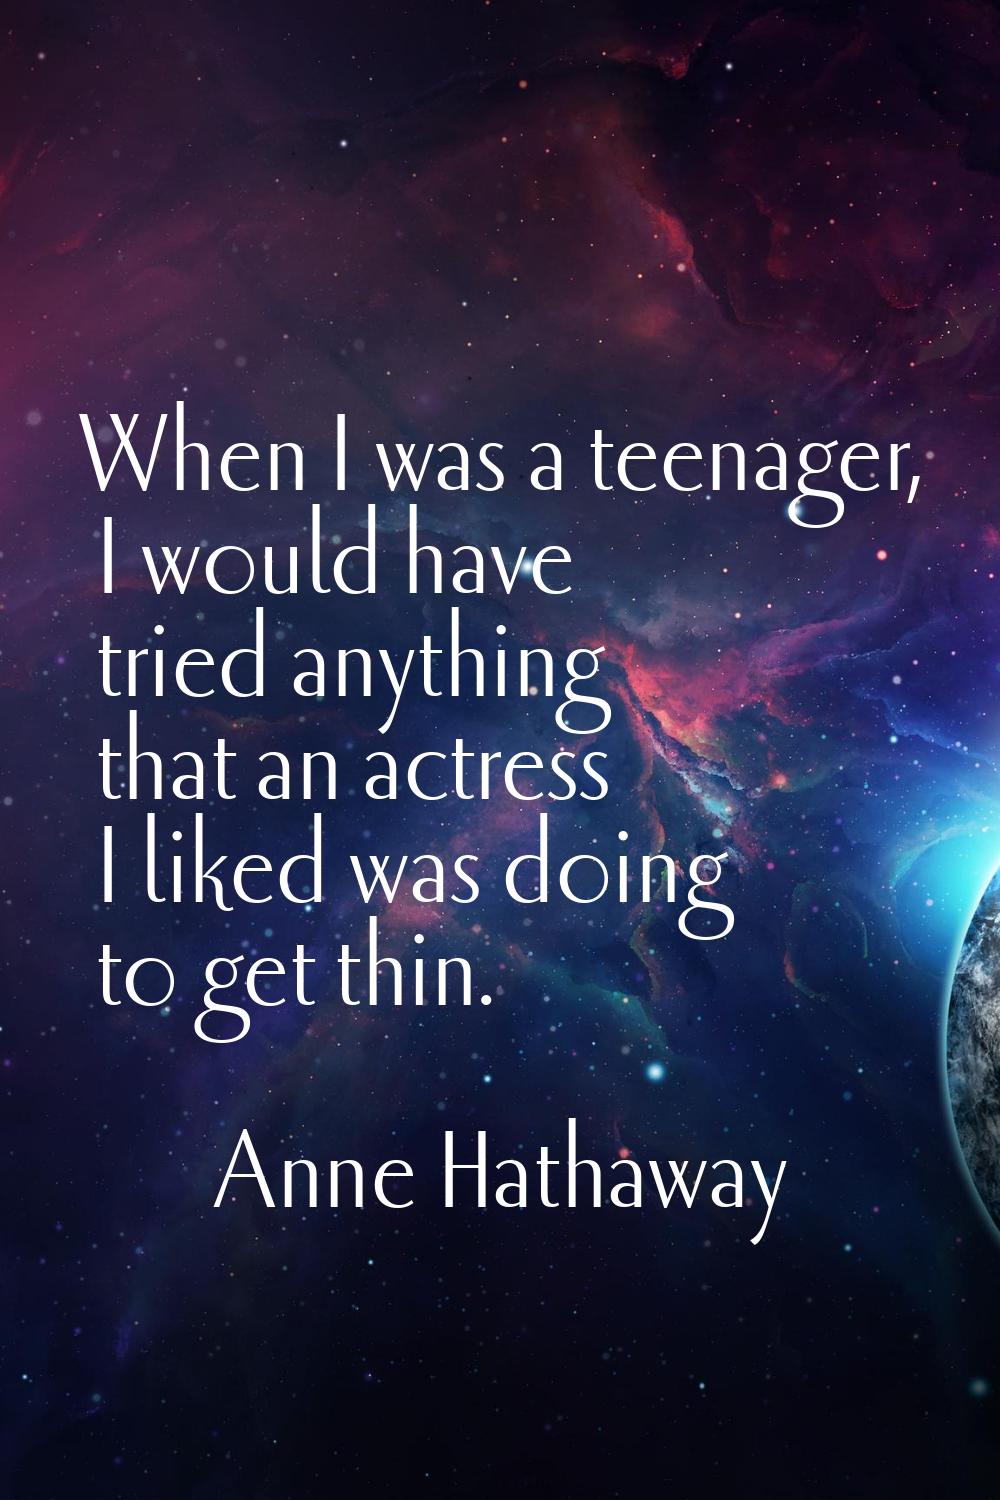 When I was a teenager, I would have tried anything that an actress I liked was doing to get thin.